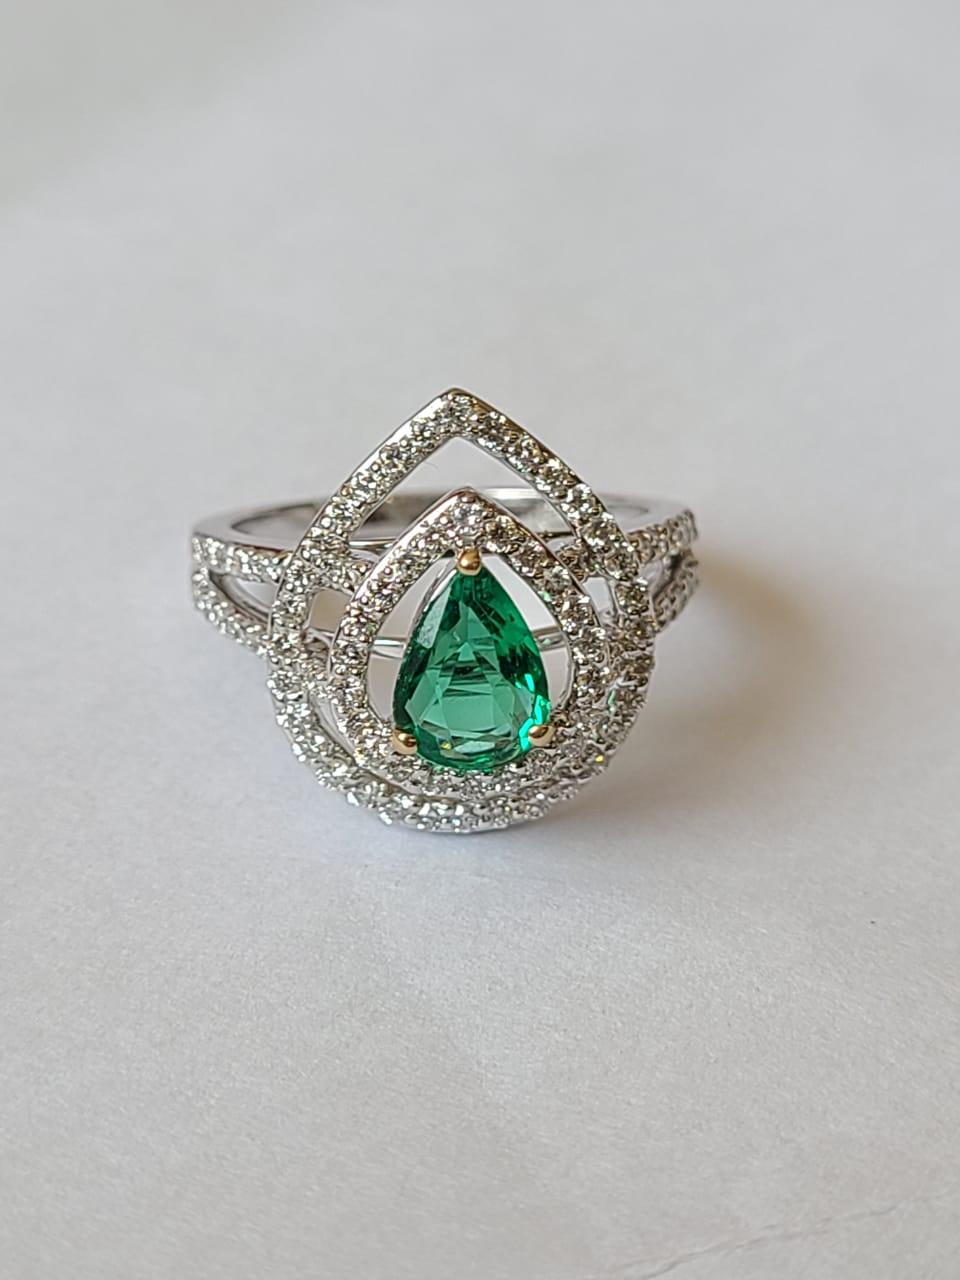 Set in 18K White Gold, Zambian Emerald & Diamonds Cocktail/ Engagement Ring 2